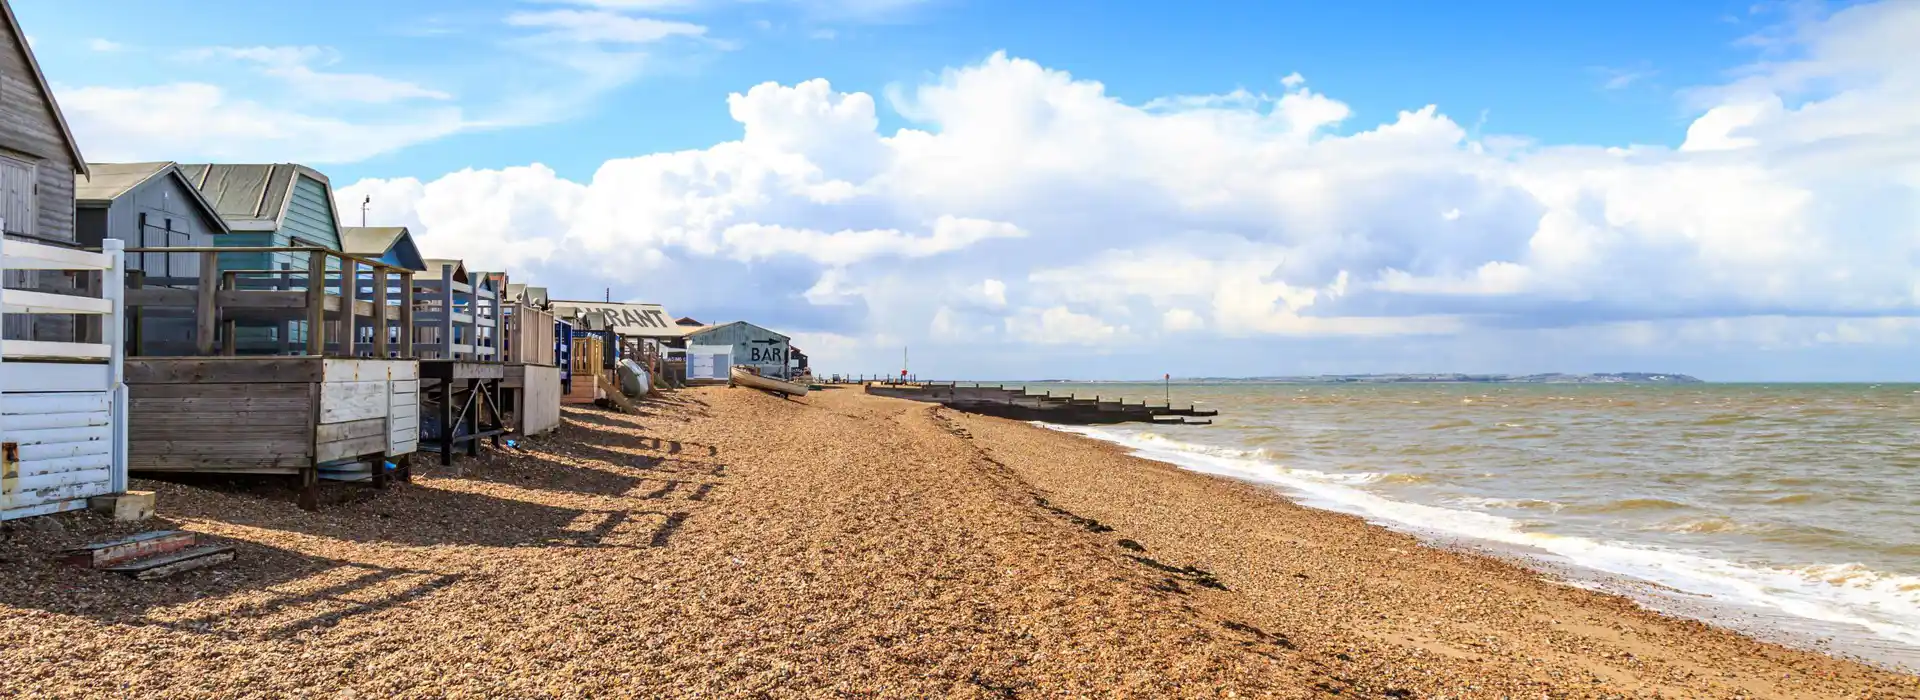 Whitstable campsites